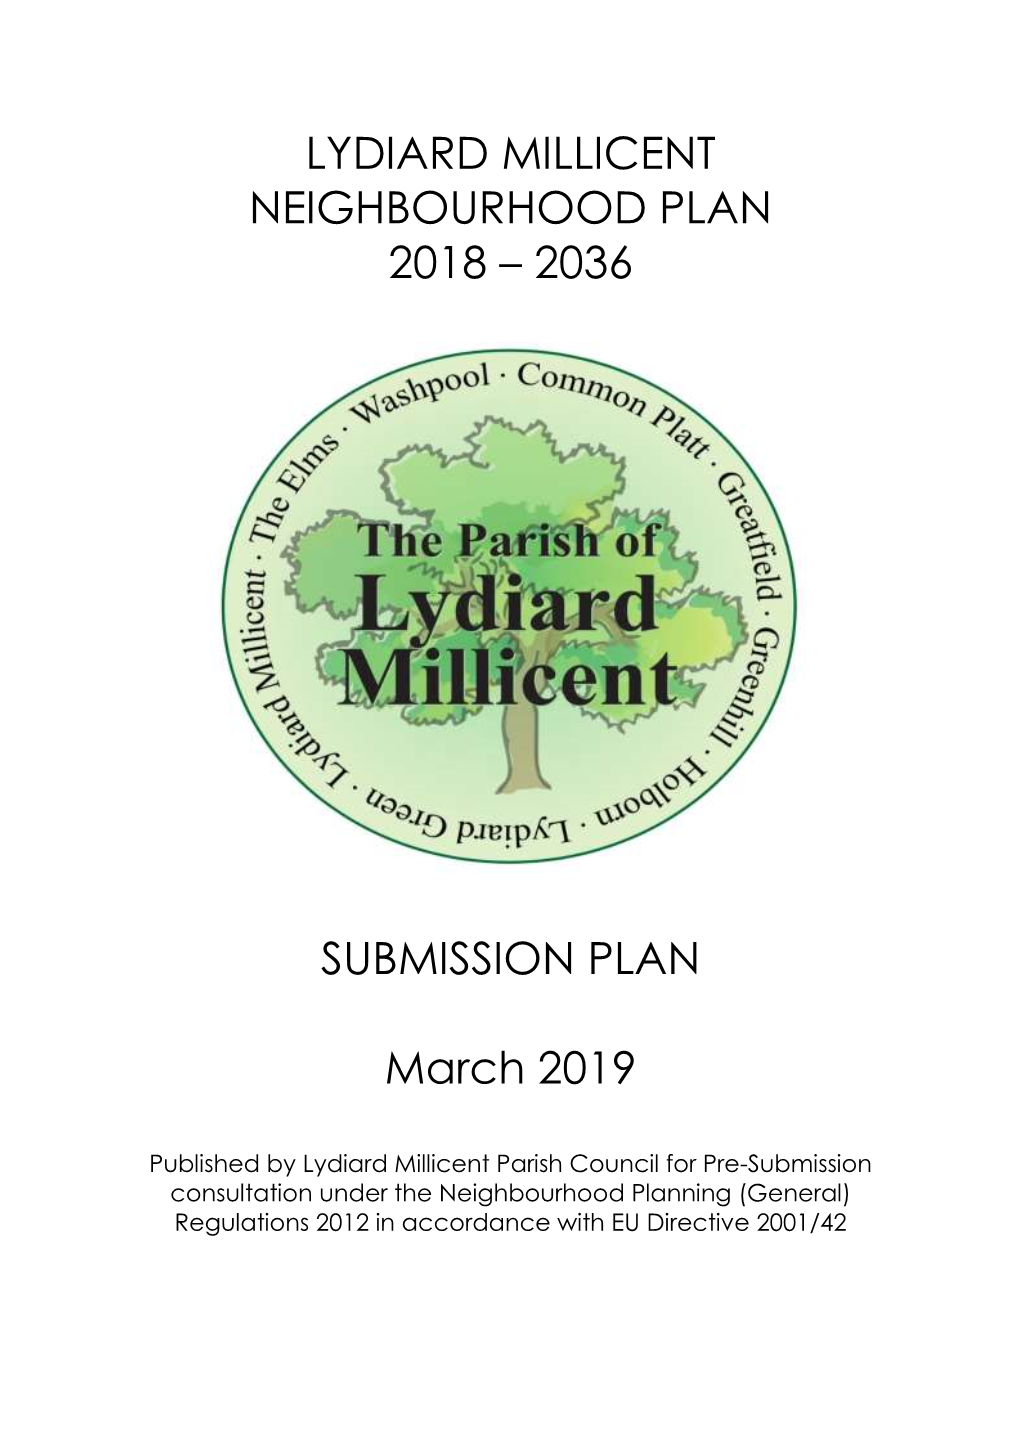 Lydiard Millicent Neighbourhood Submission Plan